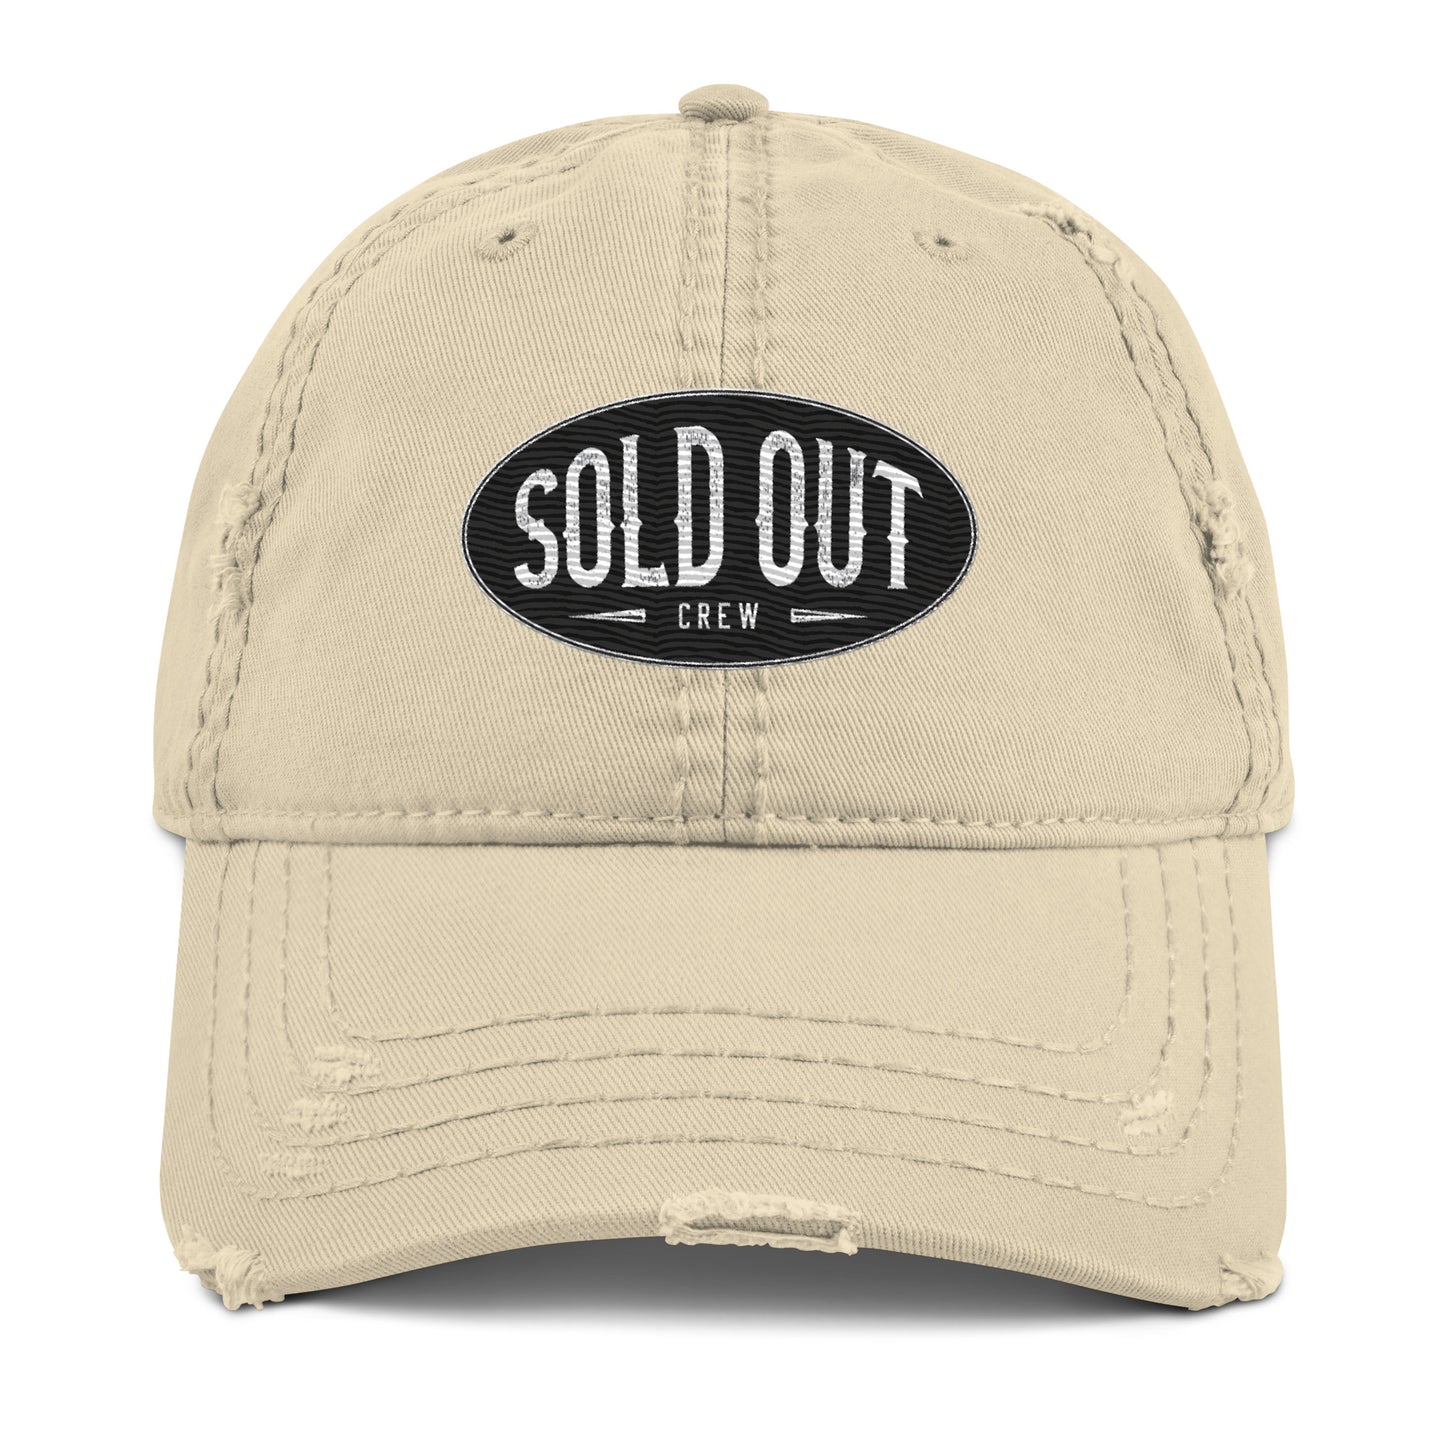 Sold Out Crew Unisex Dad Hat